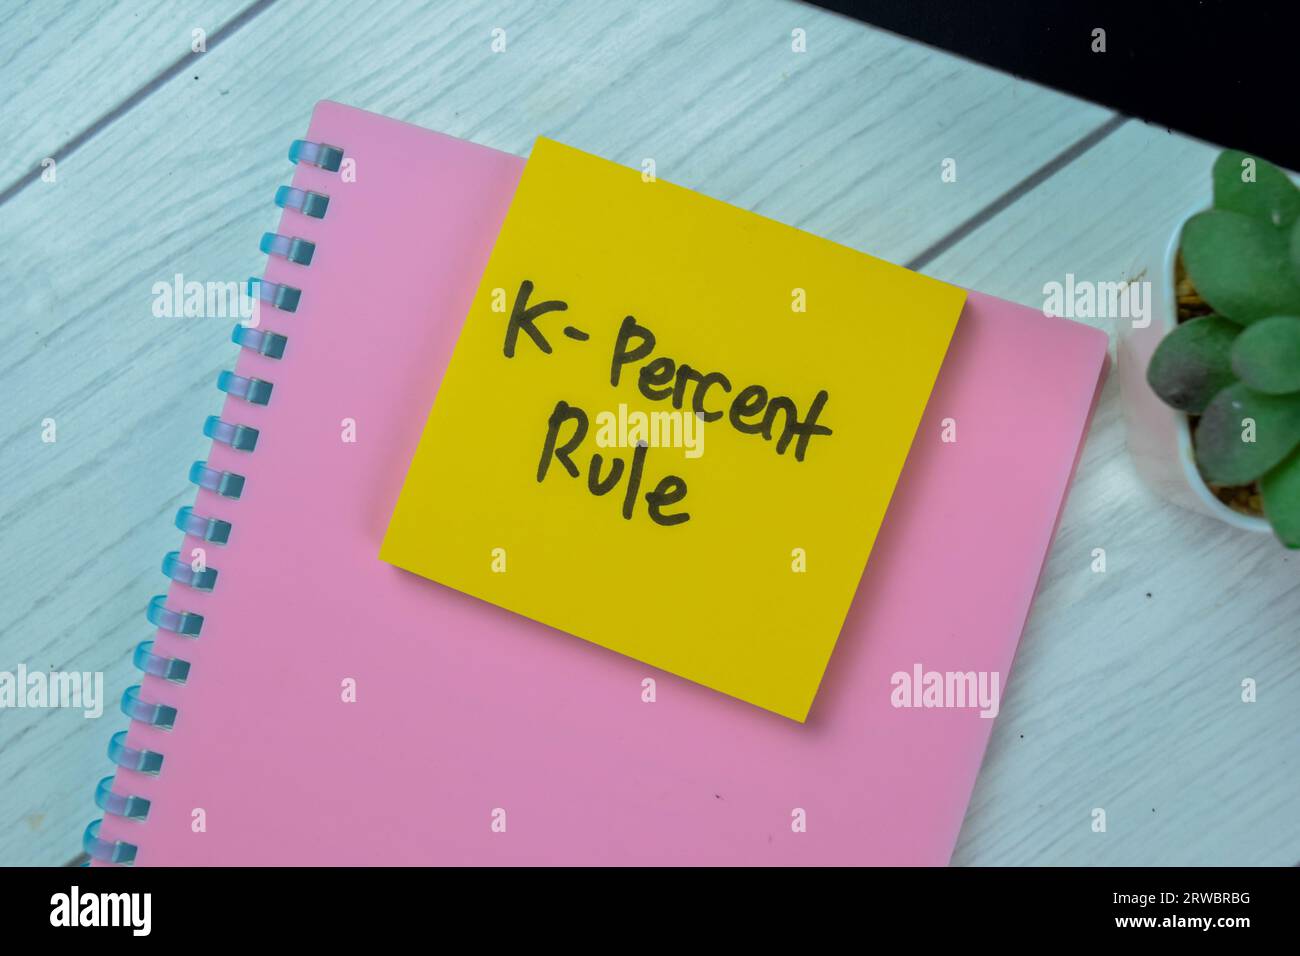 Concept of K-Percent Rule write on sticky notes isolated on Wooden Table. Stock Photo